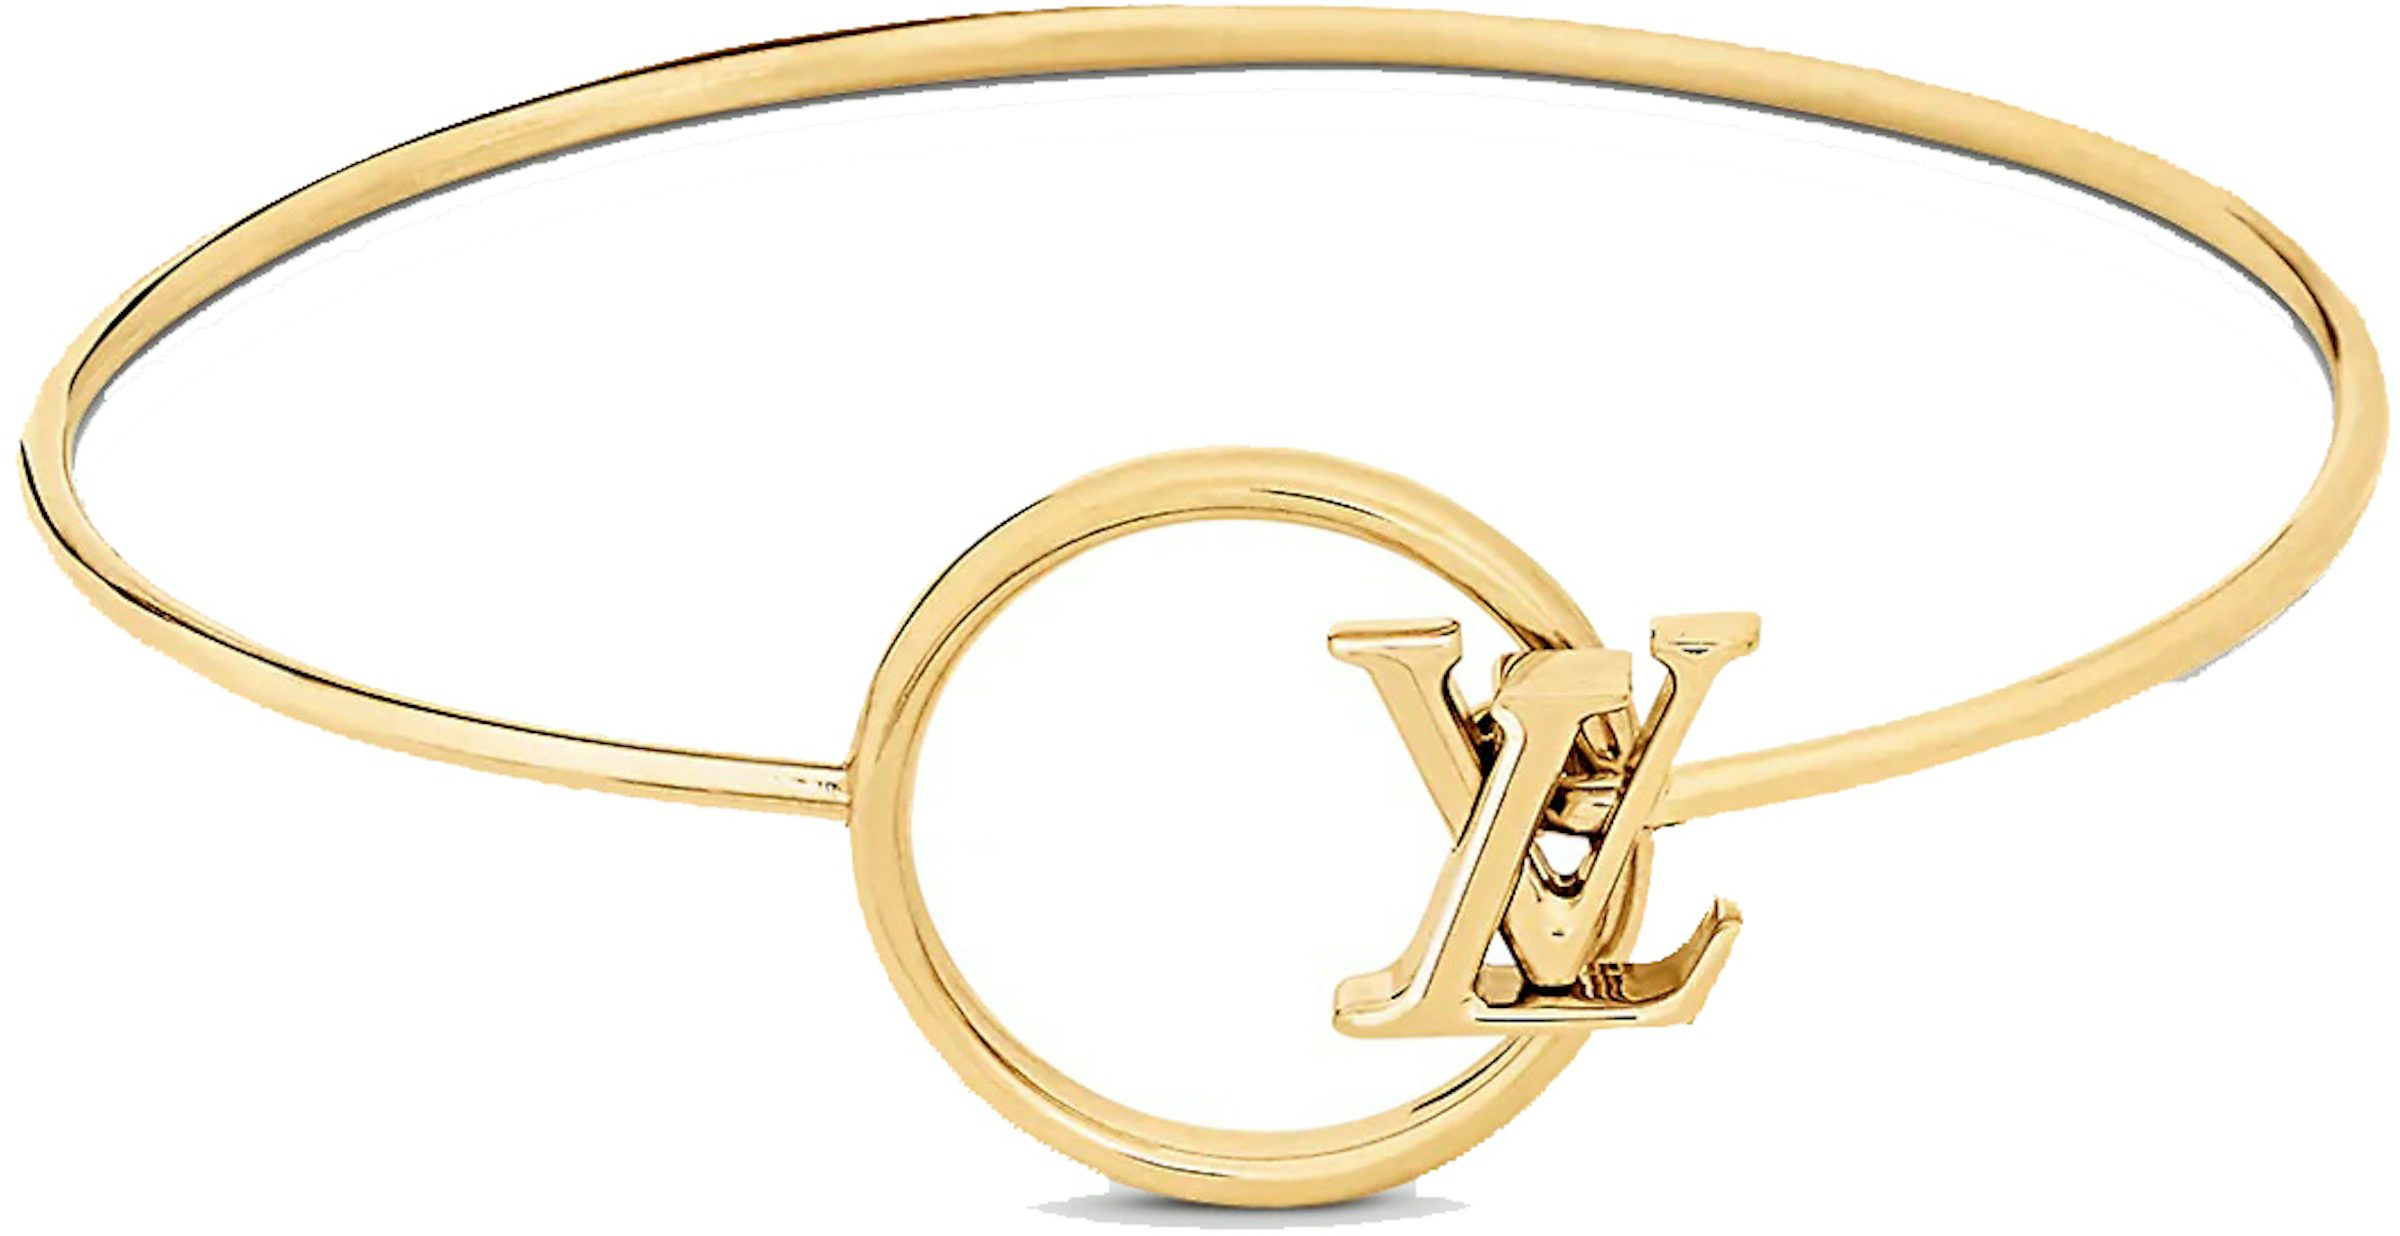 Buy Louis Vuitton Jewelry Accessories in Gold - Release Date - StockX